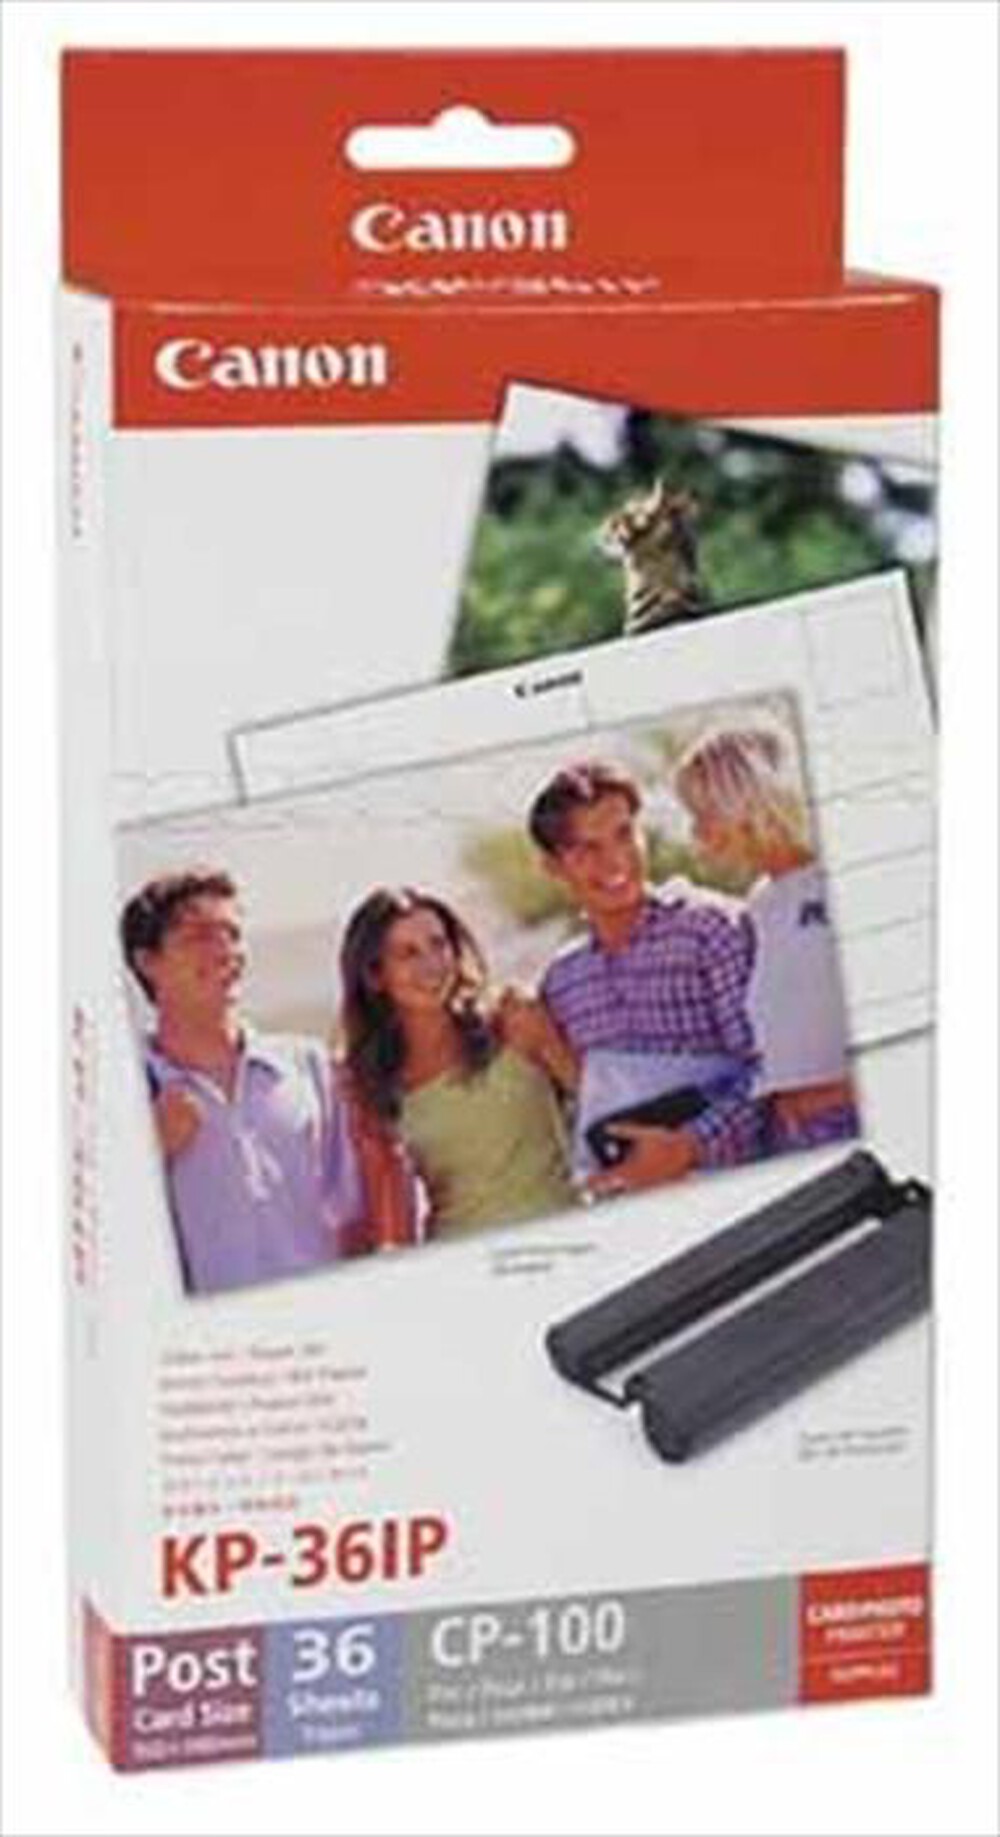 "CANON - KP-36IP Ink Paper-Set-White"